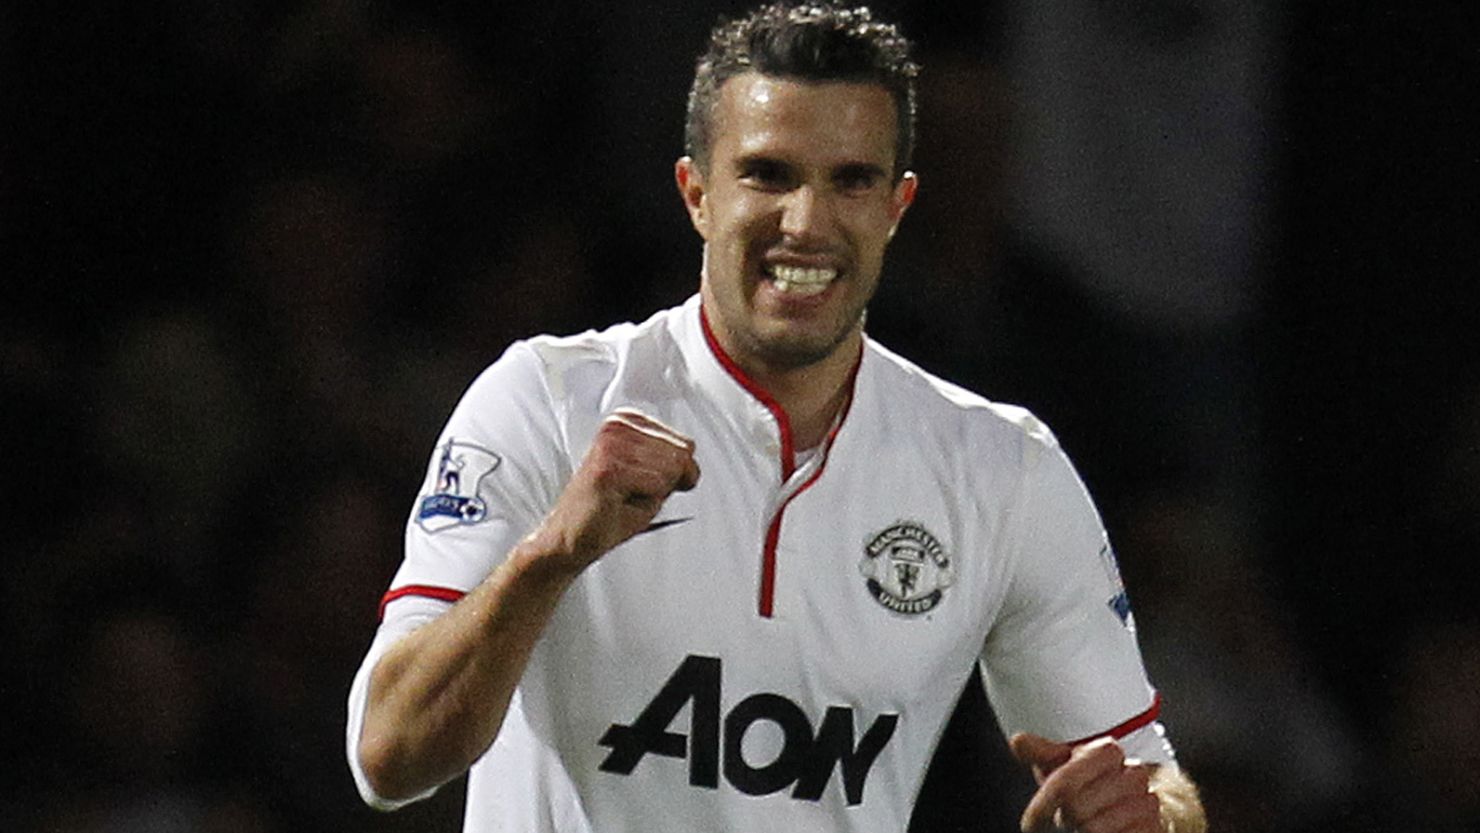 Robin van Persie grabbed an equalizer as Manchester United drew 2-2 with West Ham